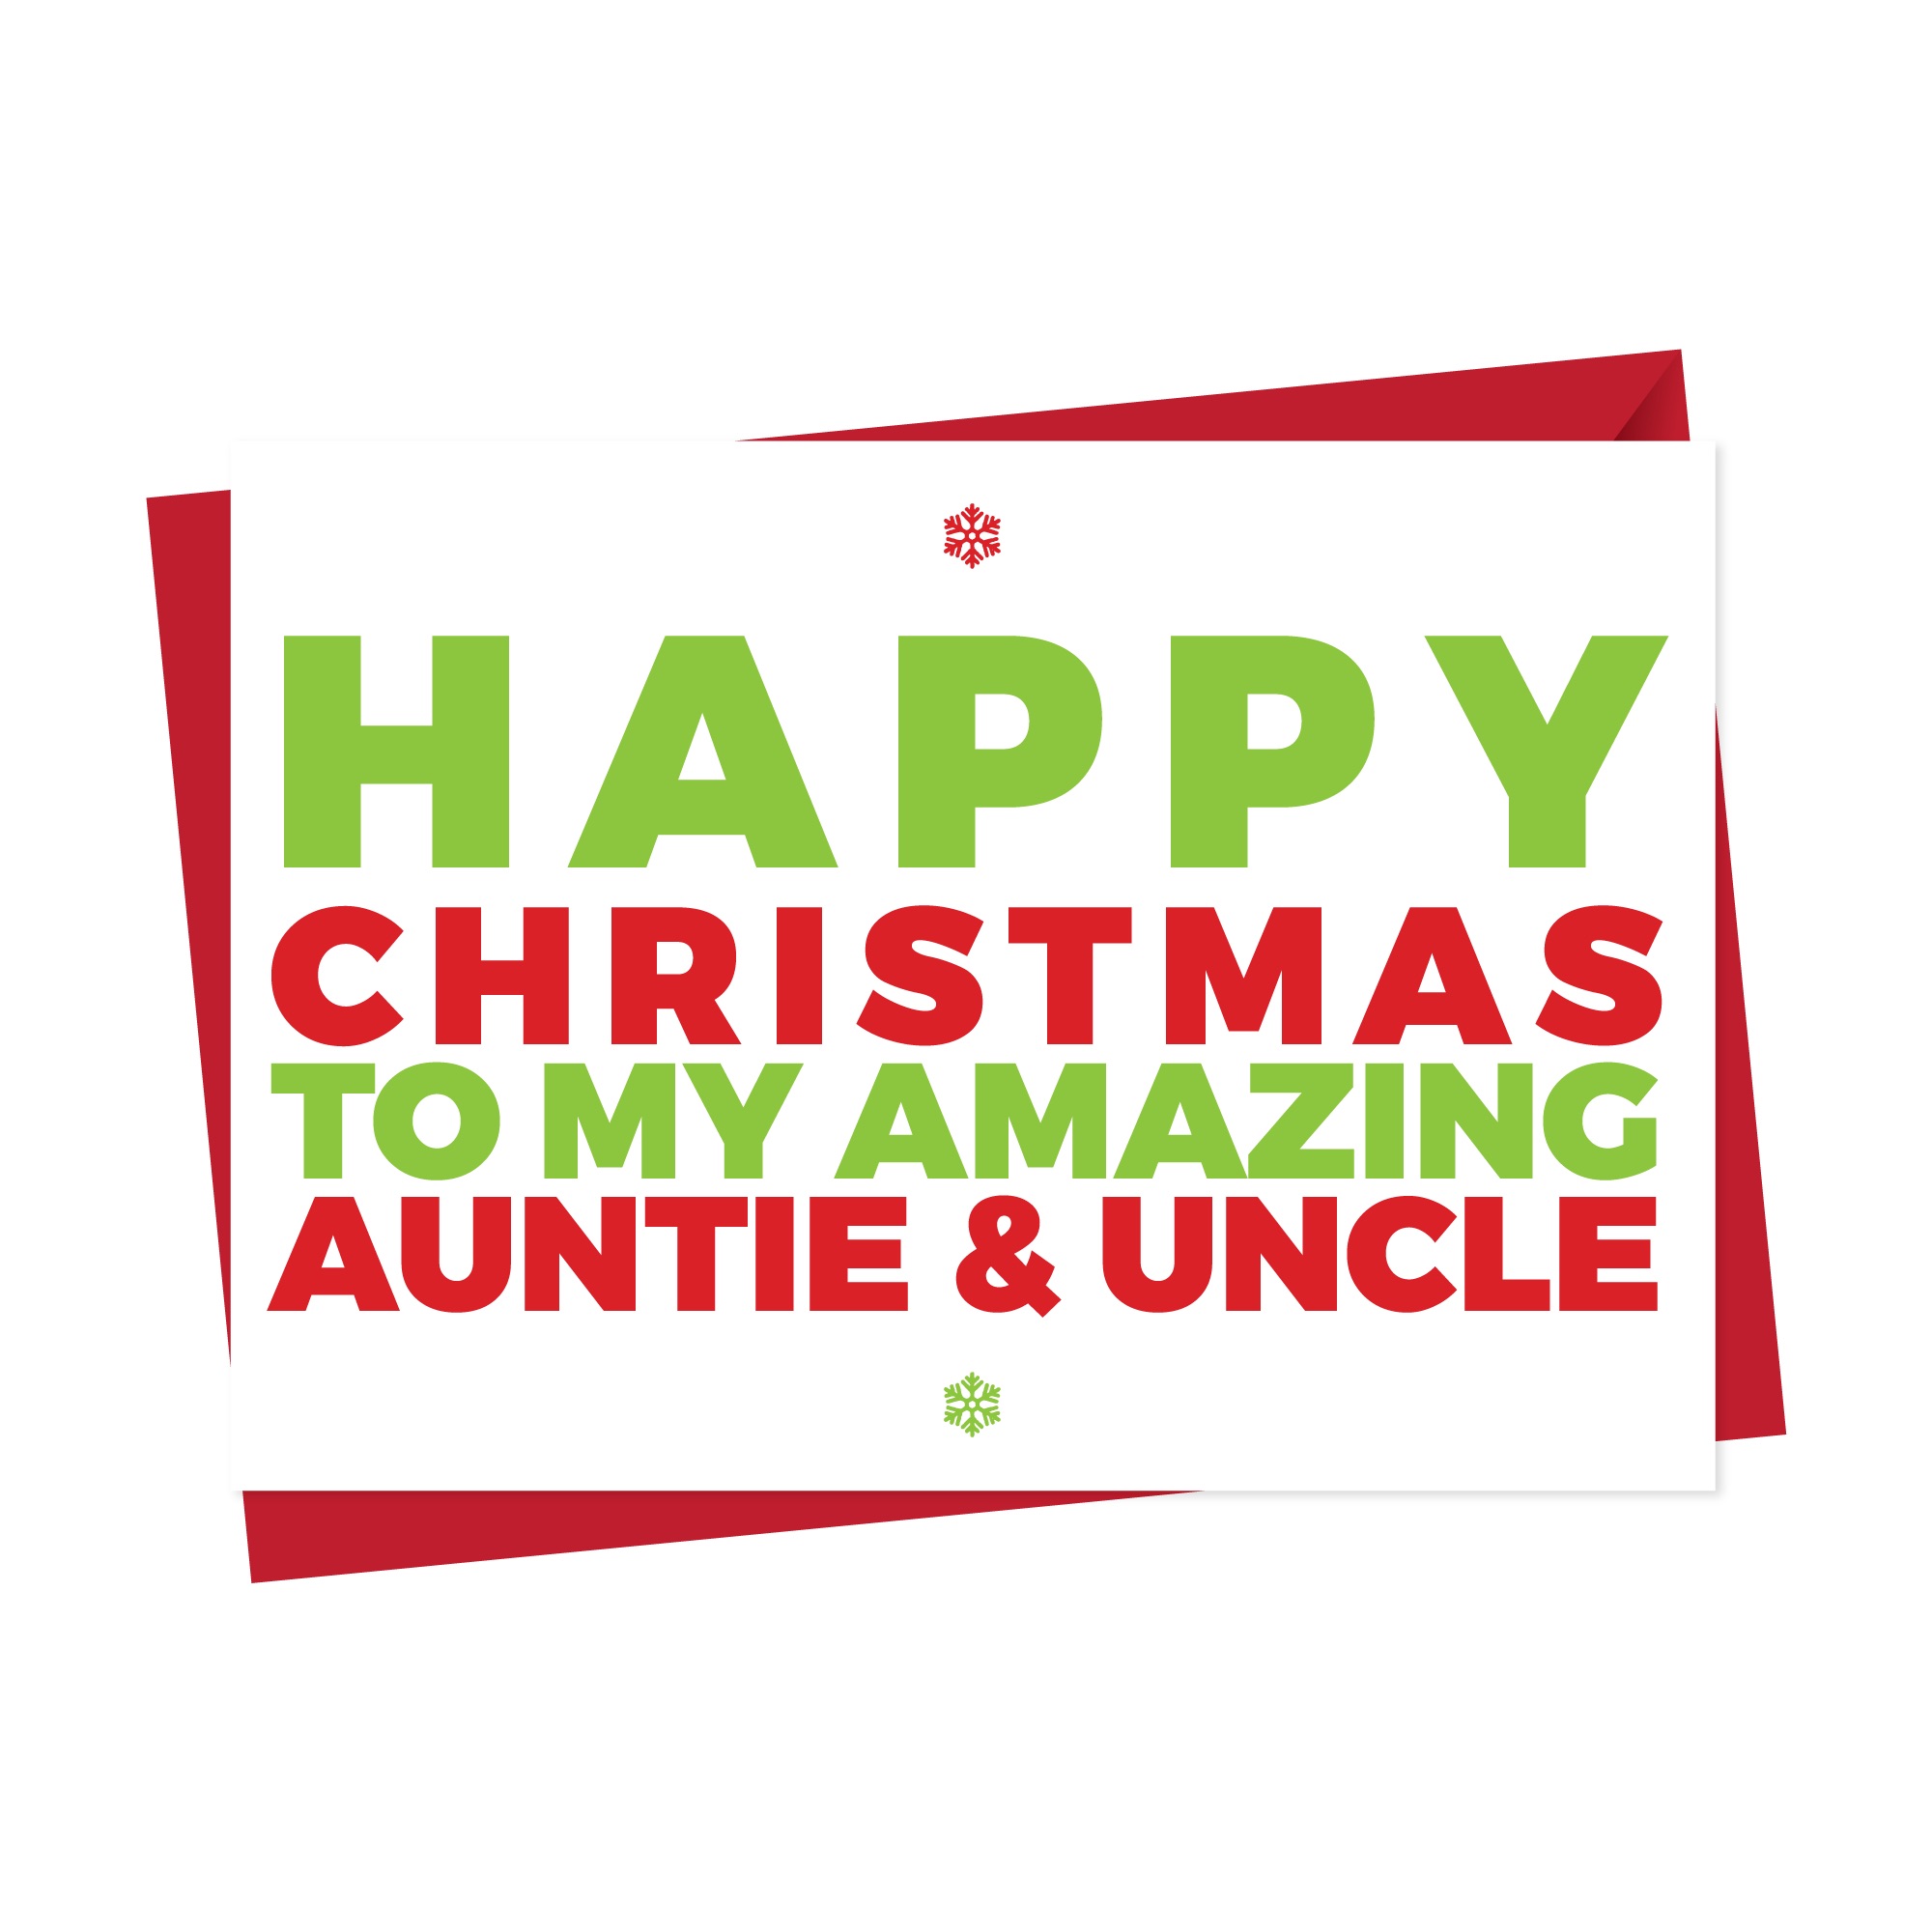 Christmas Card for An Amazing Aunt and Uncle